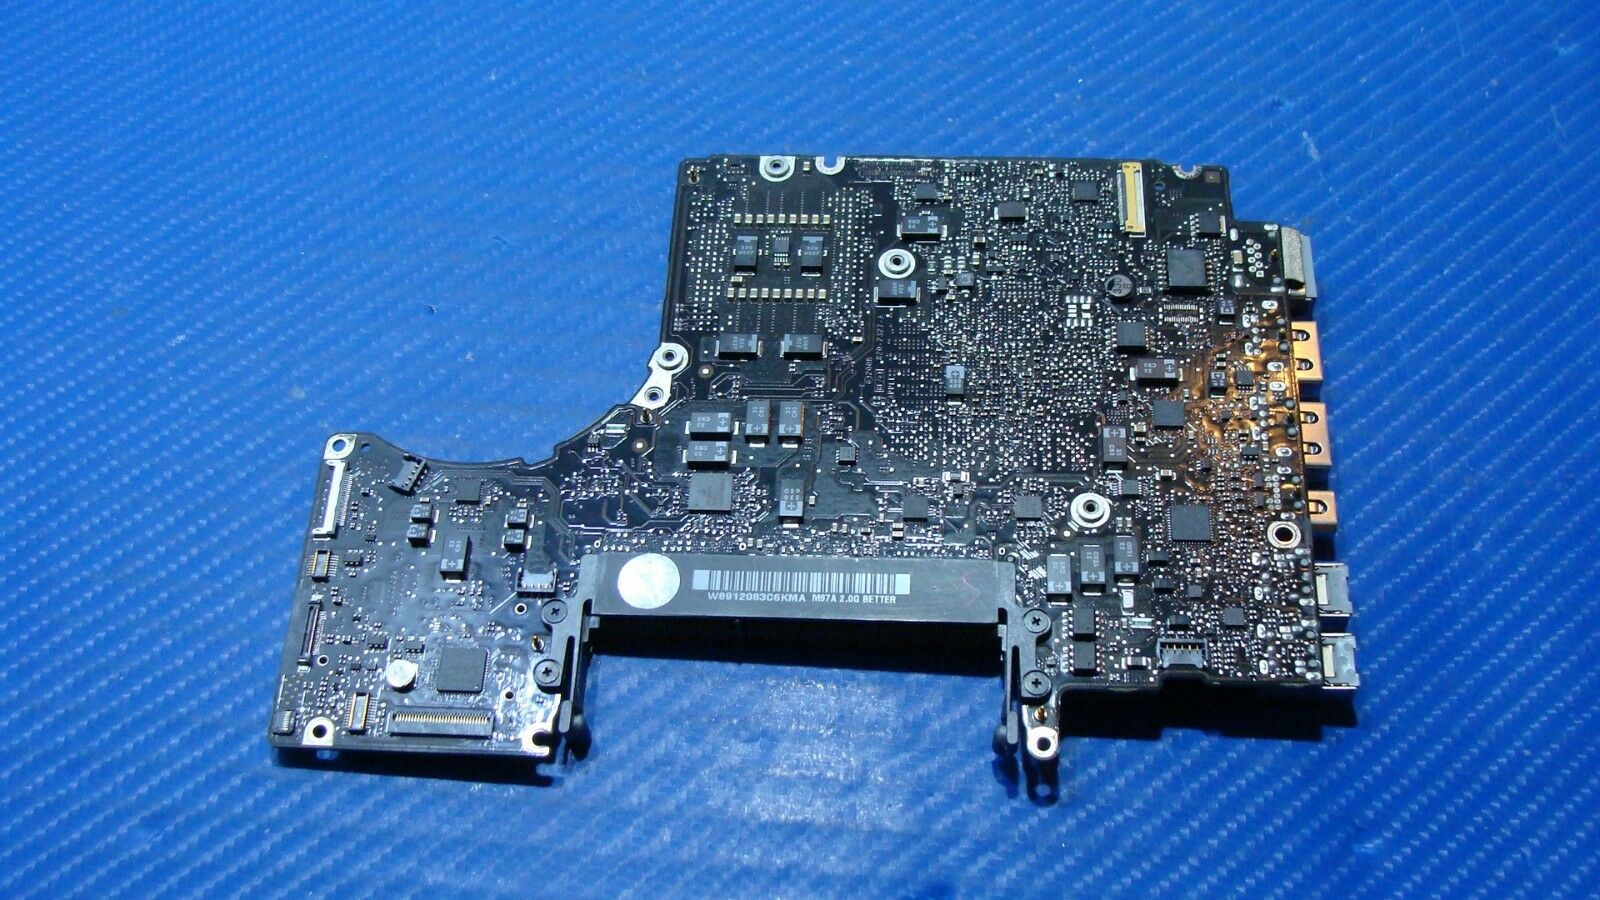 MacBook A1278 13 2008 MB466LL Core 2 Duo P7350 2.0GHz Logic Board 661-4818 AS IS - Laptop Parts - Buy Authentic Computer Parts - Top Seller Ebay